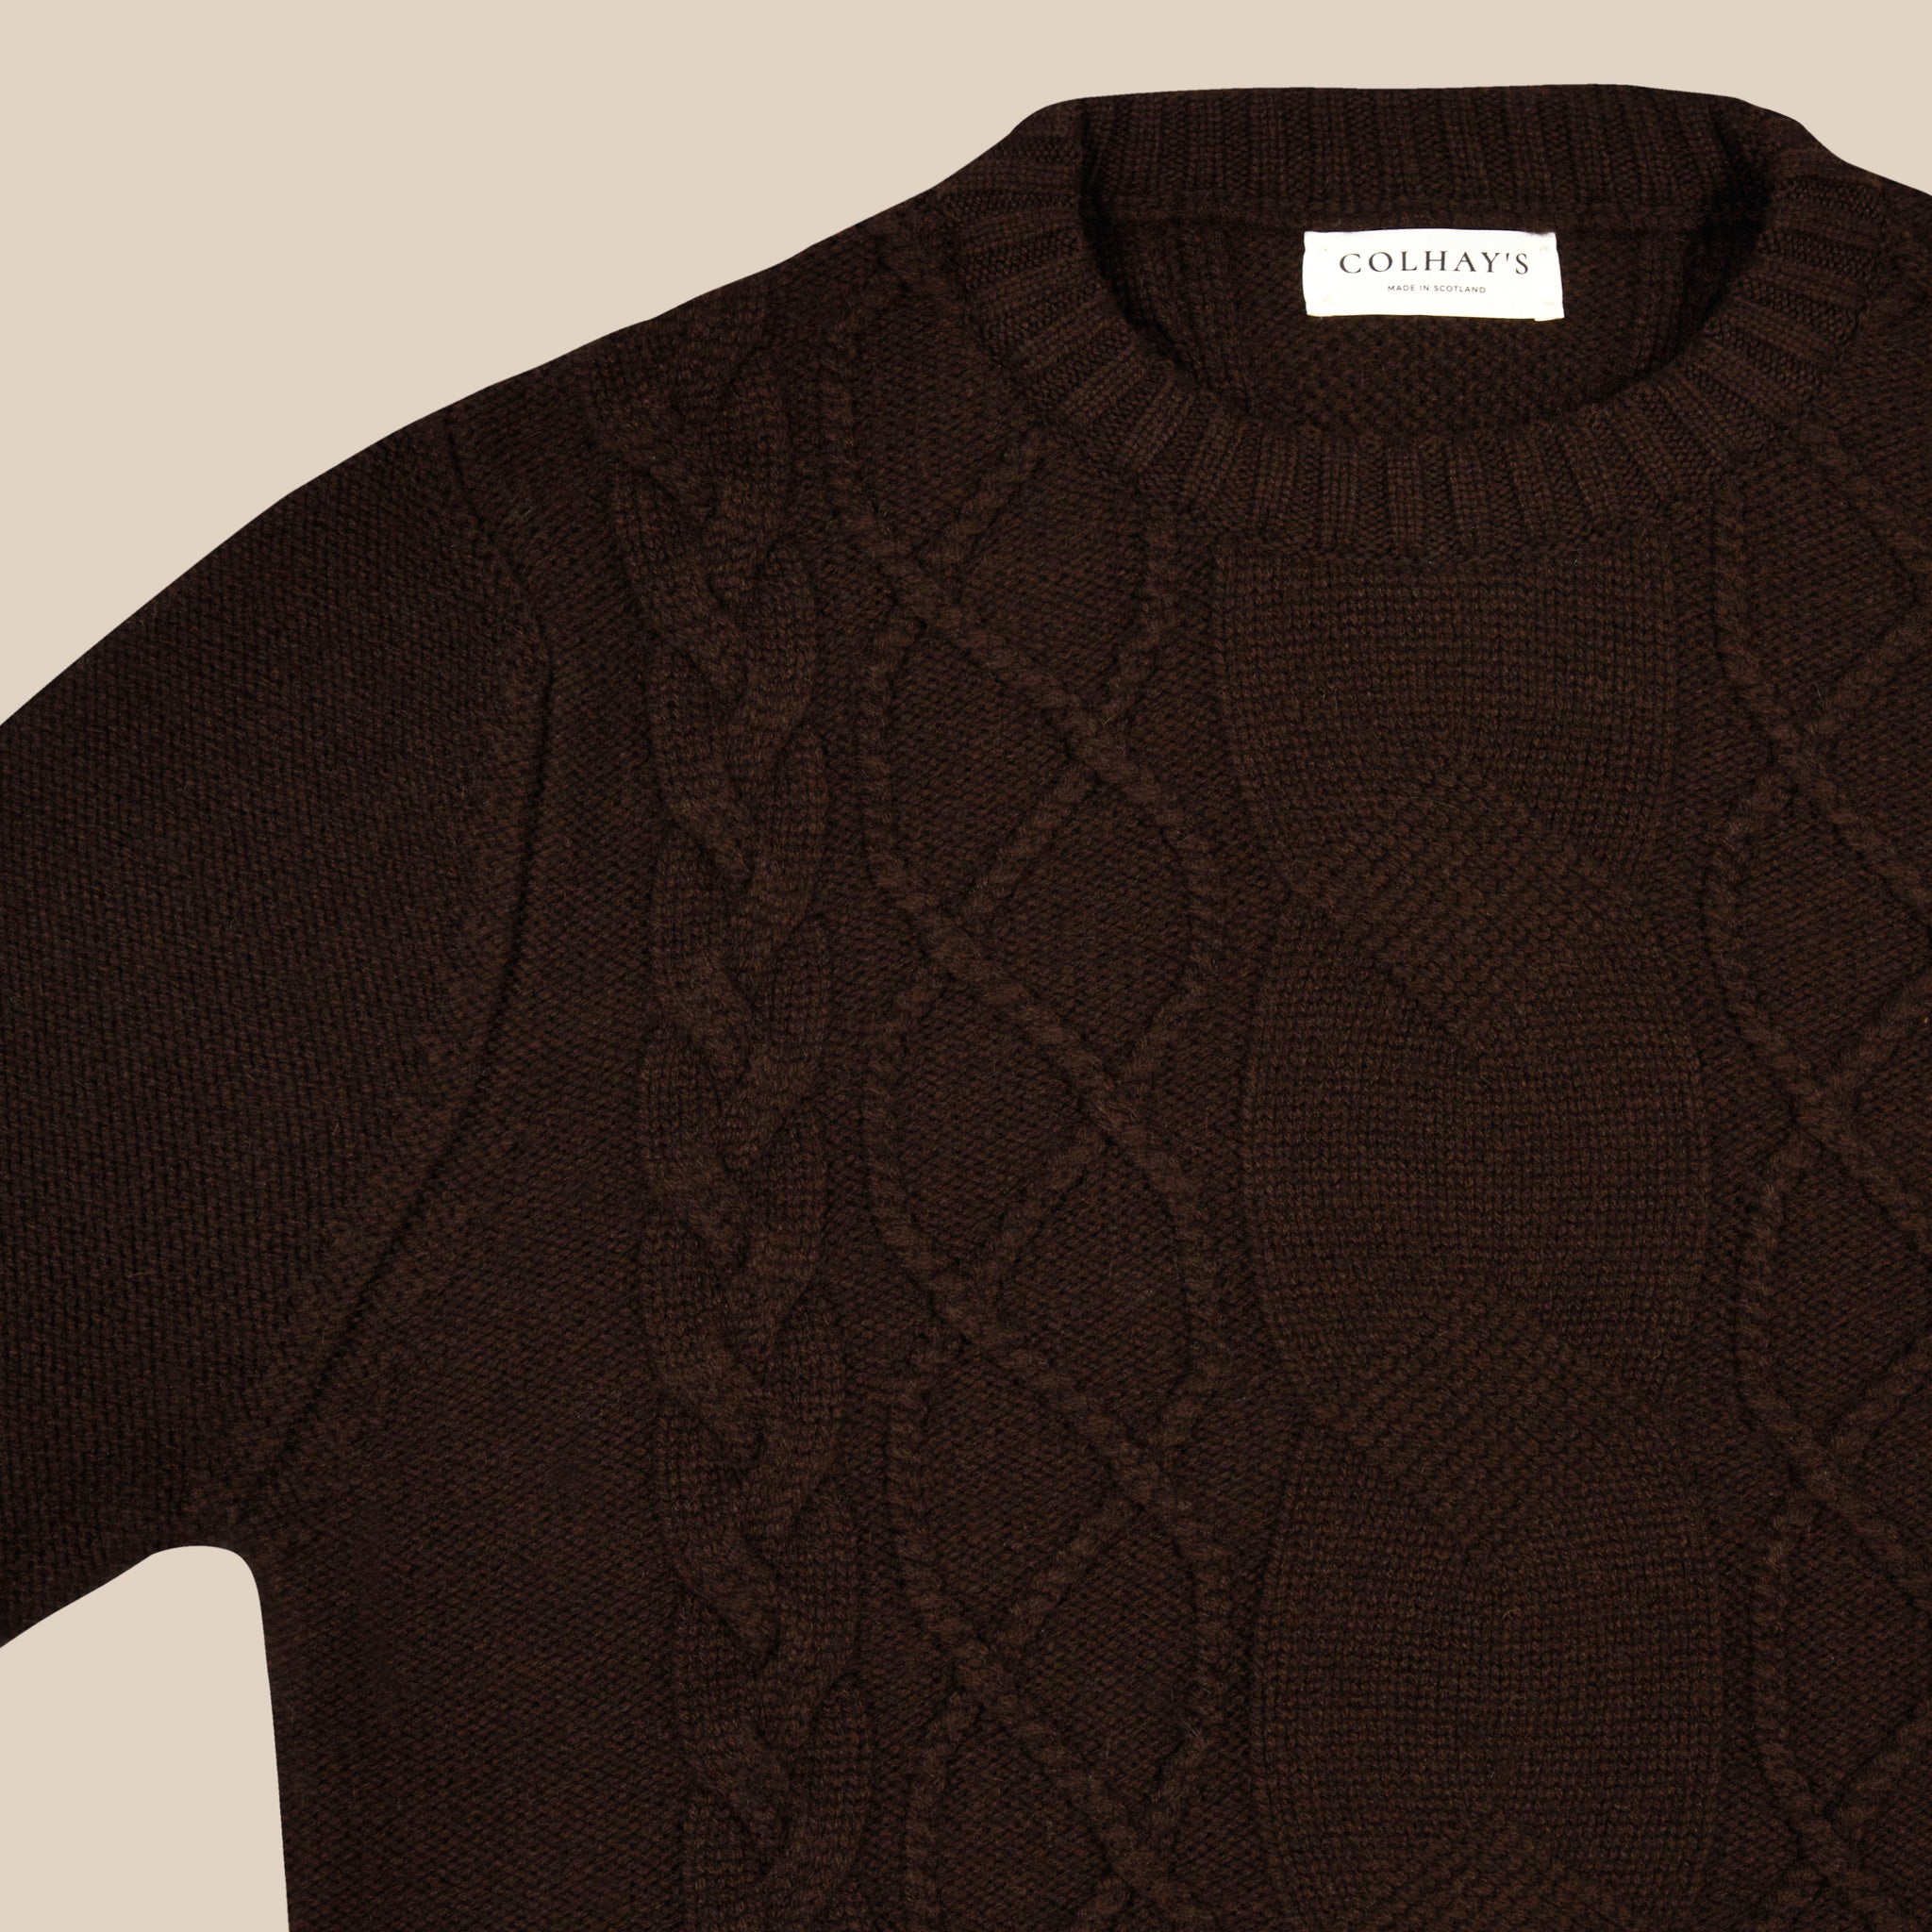 Cashmere wool chalet cable sweater in dark brown